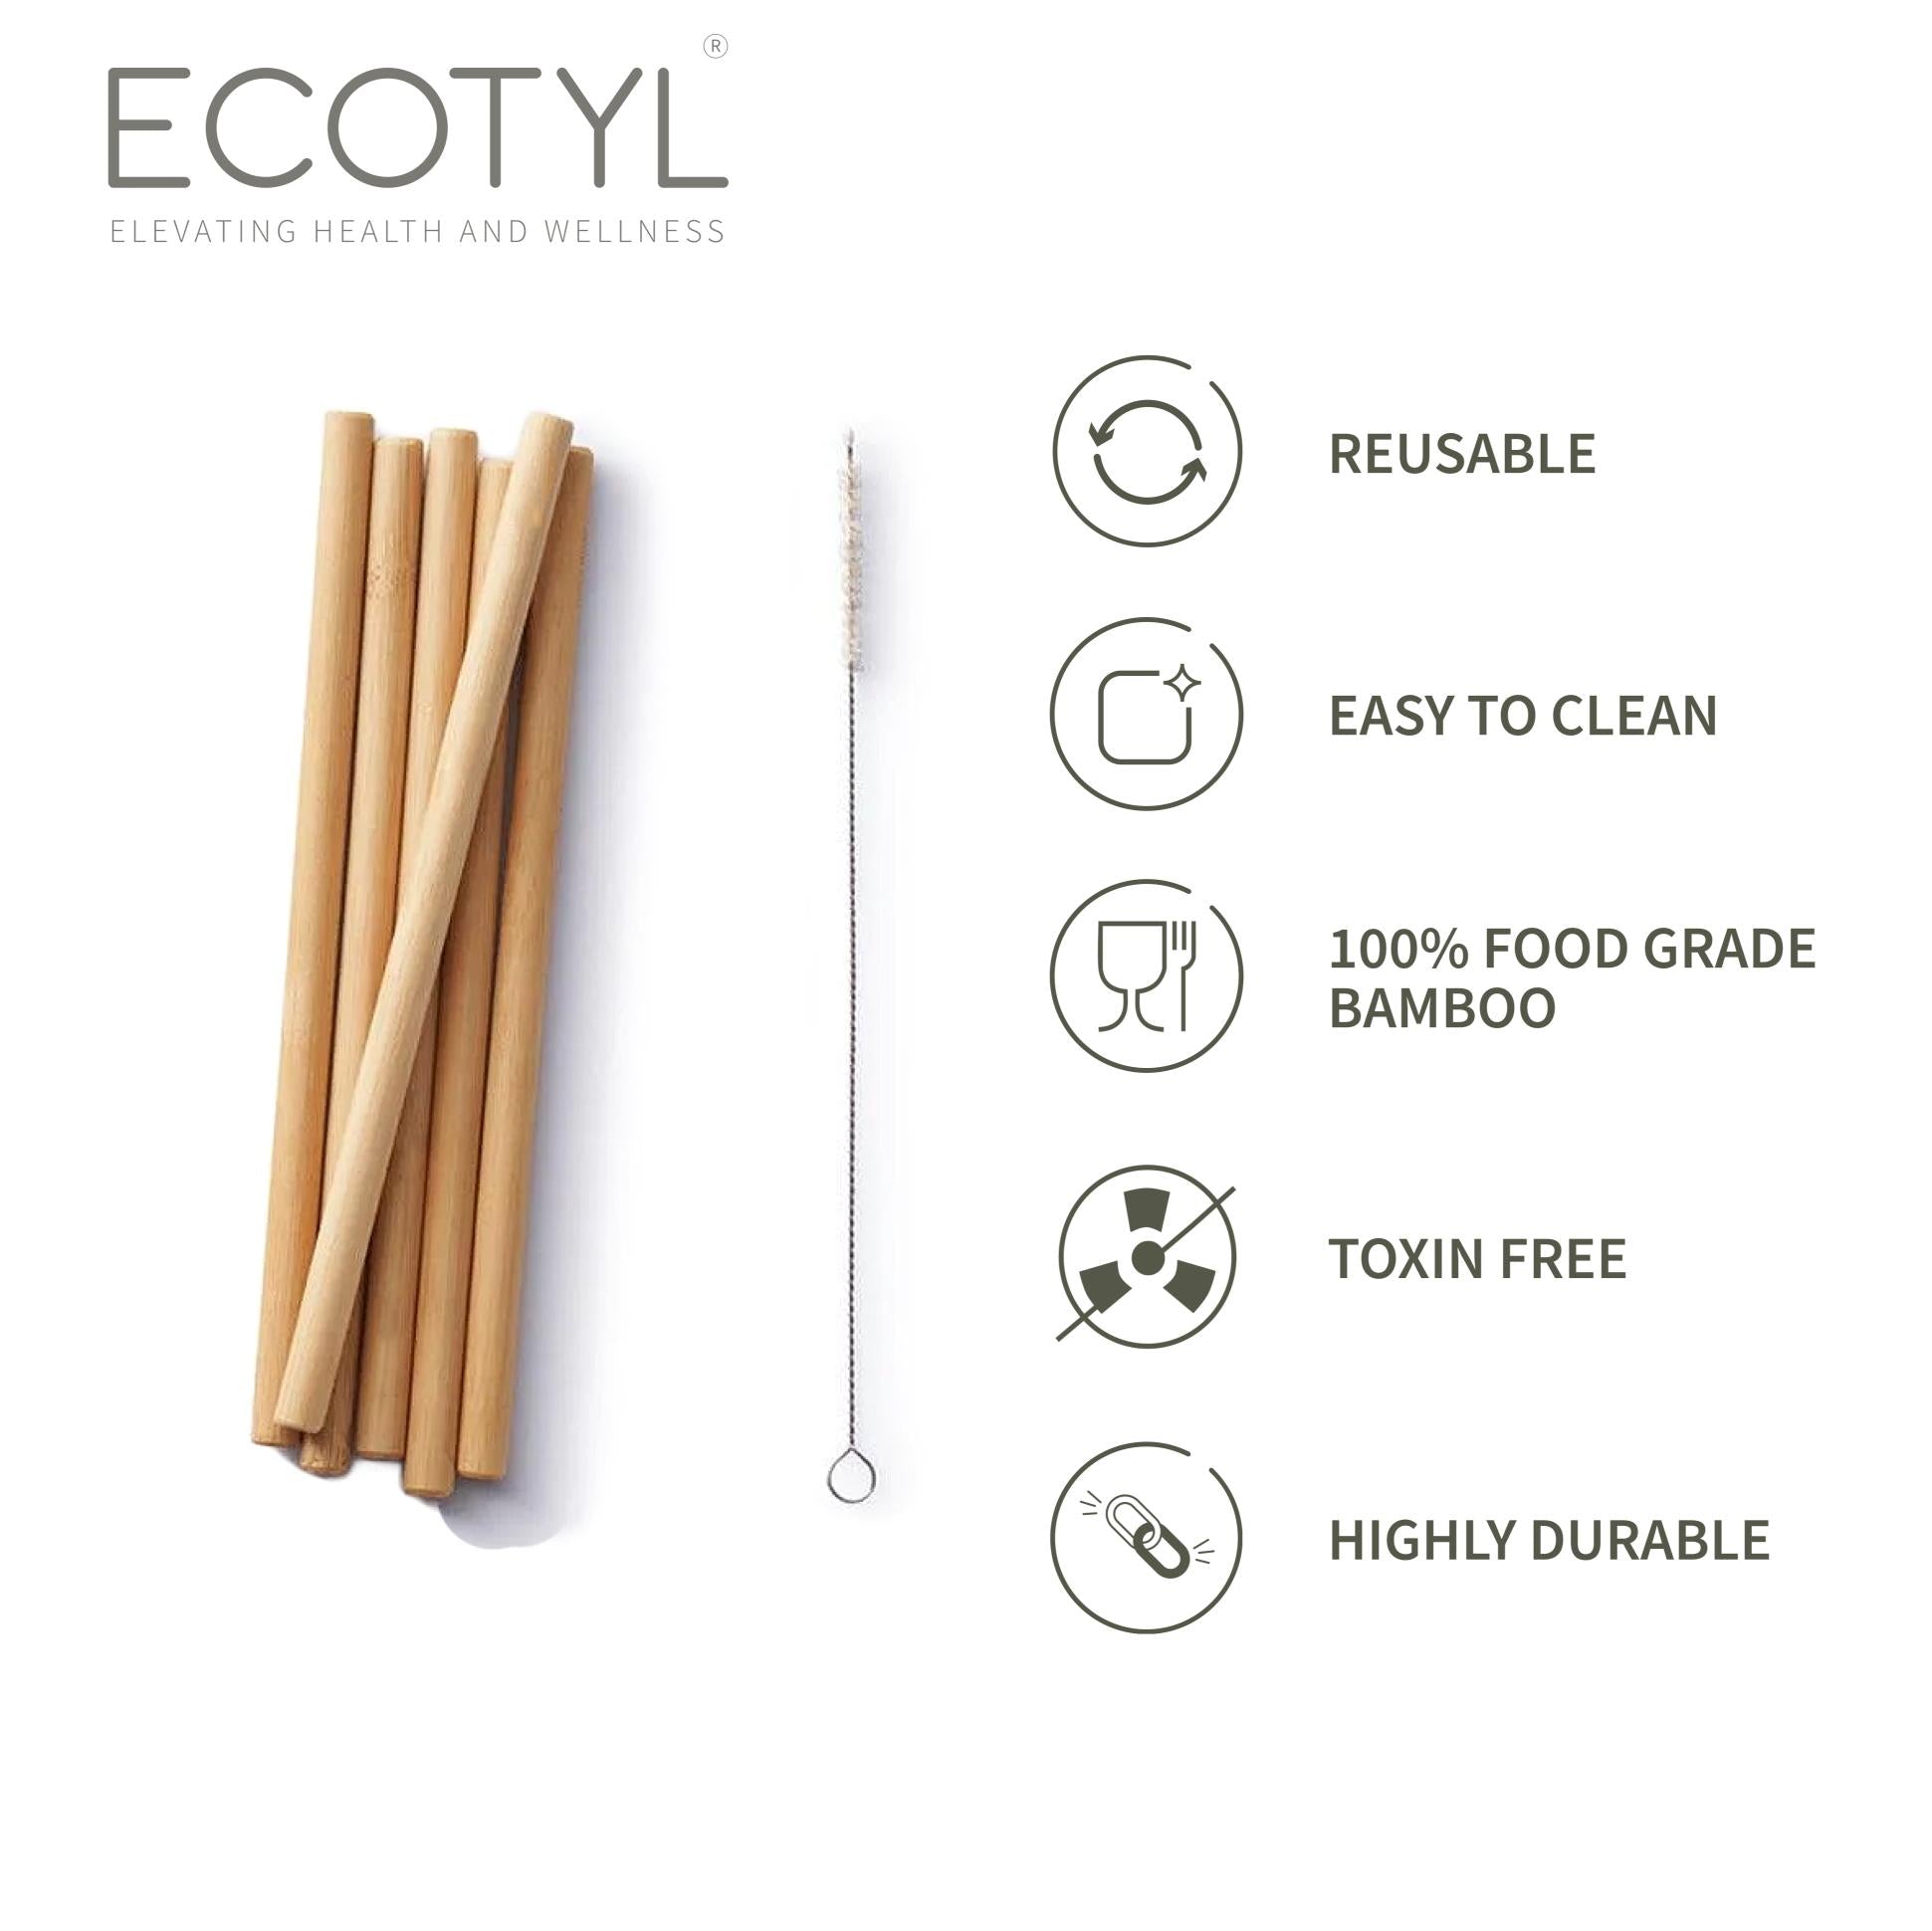 Ecotyl Bamboo Straws with Cleaning Brush | Set of 6 | Reusable Straws